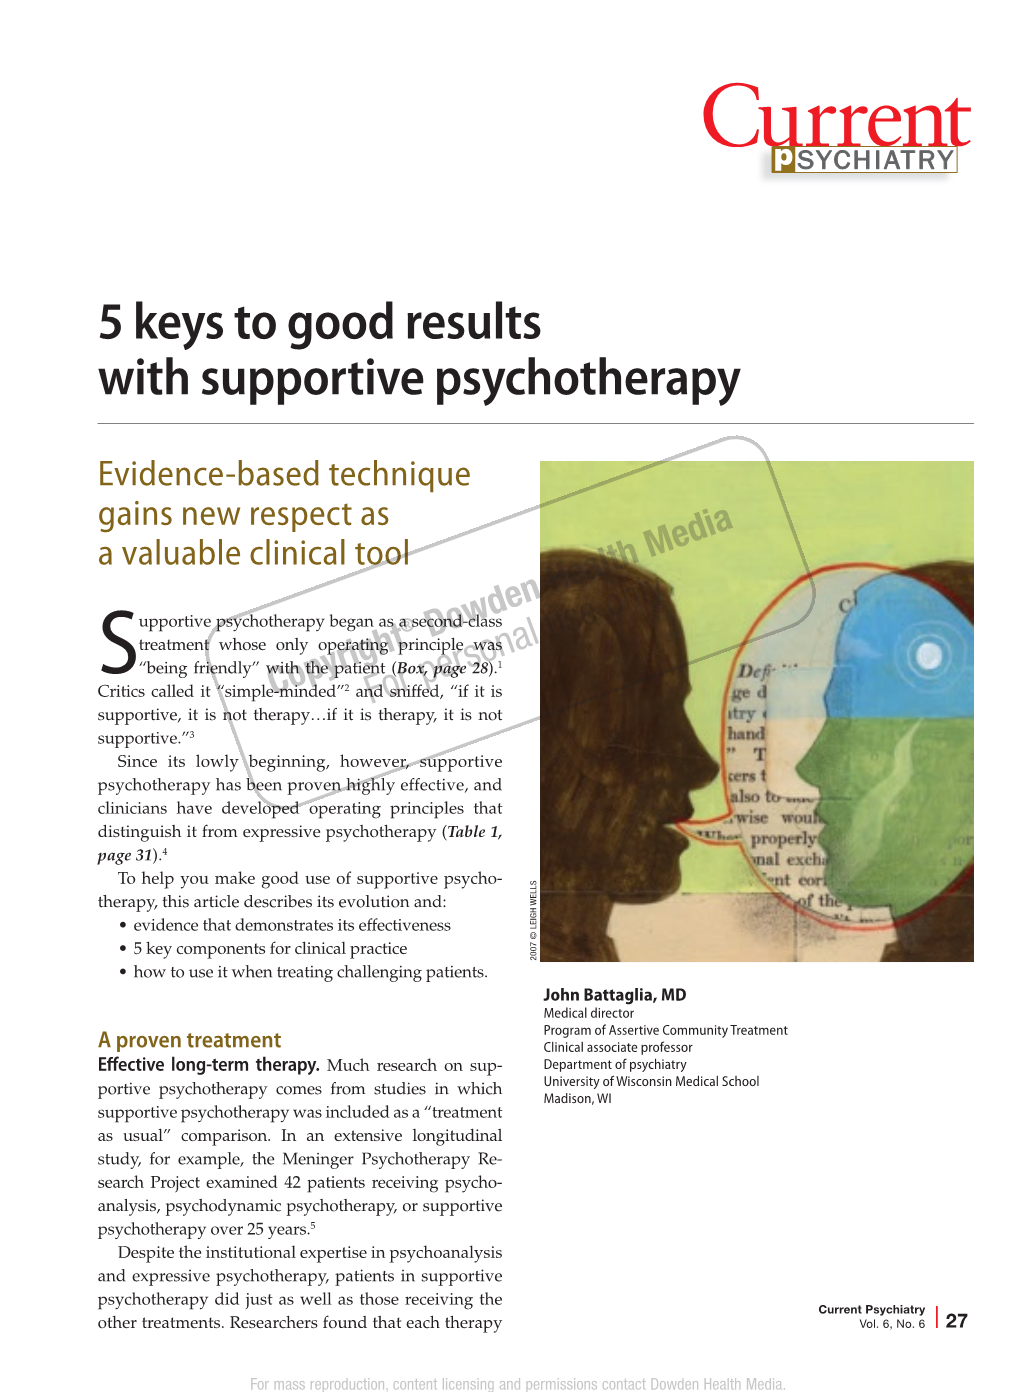 5 Keys to Good Results with Supportive Psychotherapy